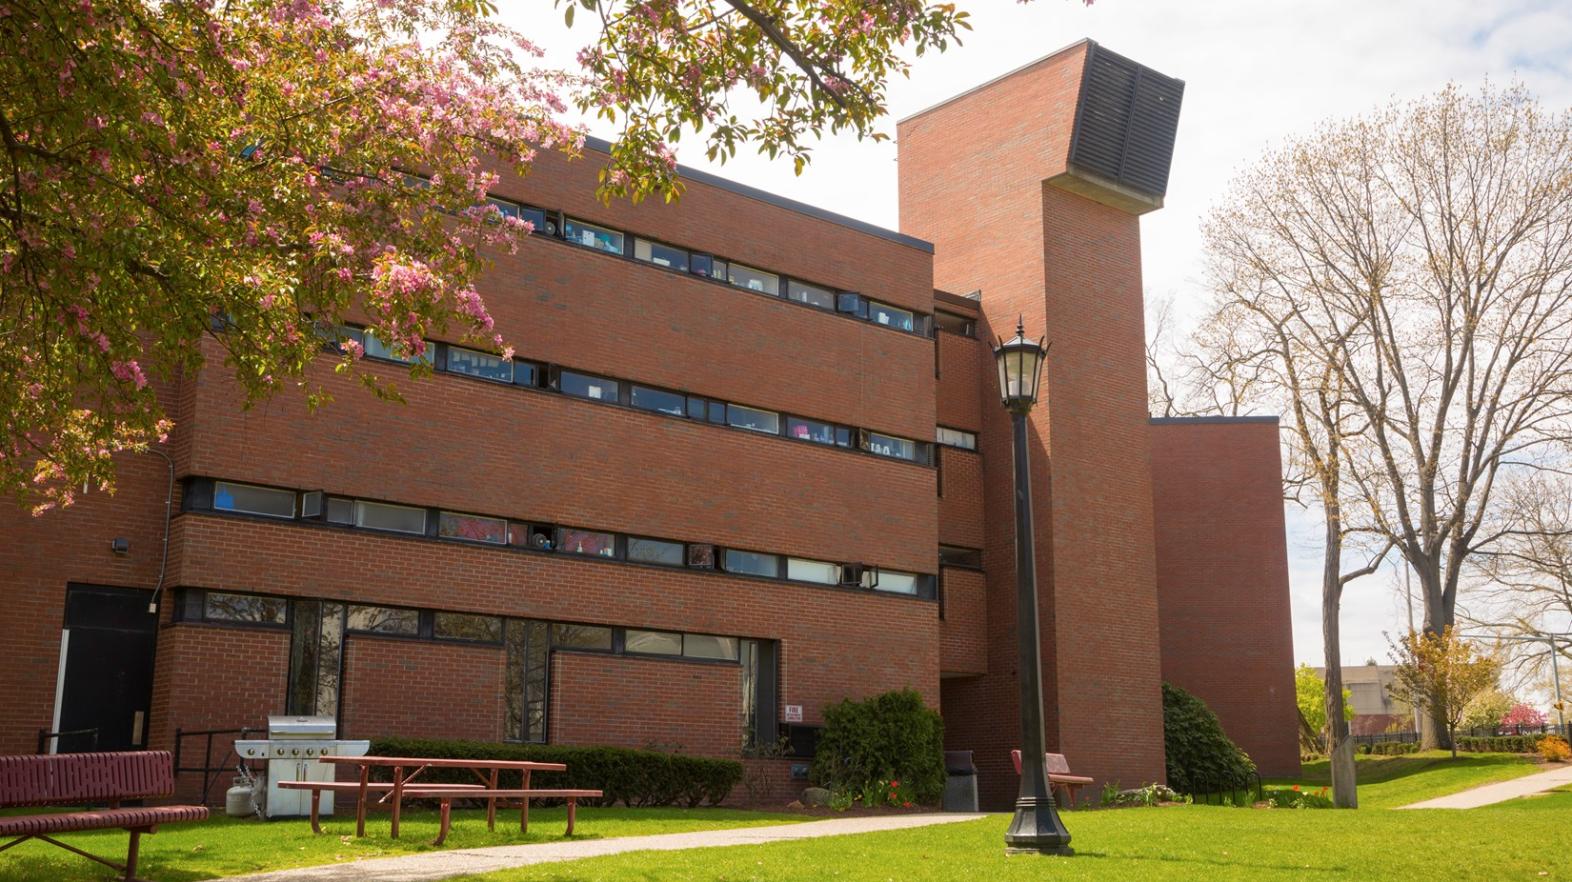 Gulick Hall, a residence hall for first-year students